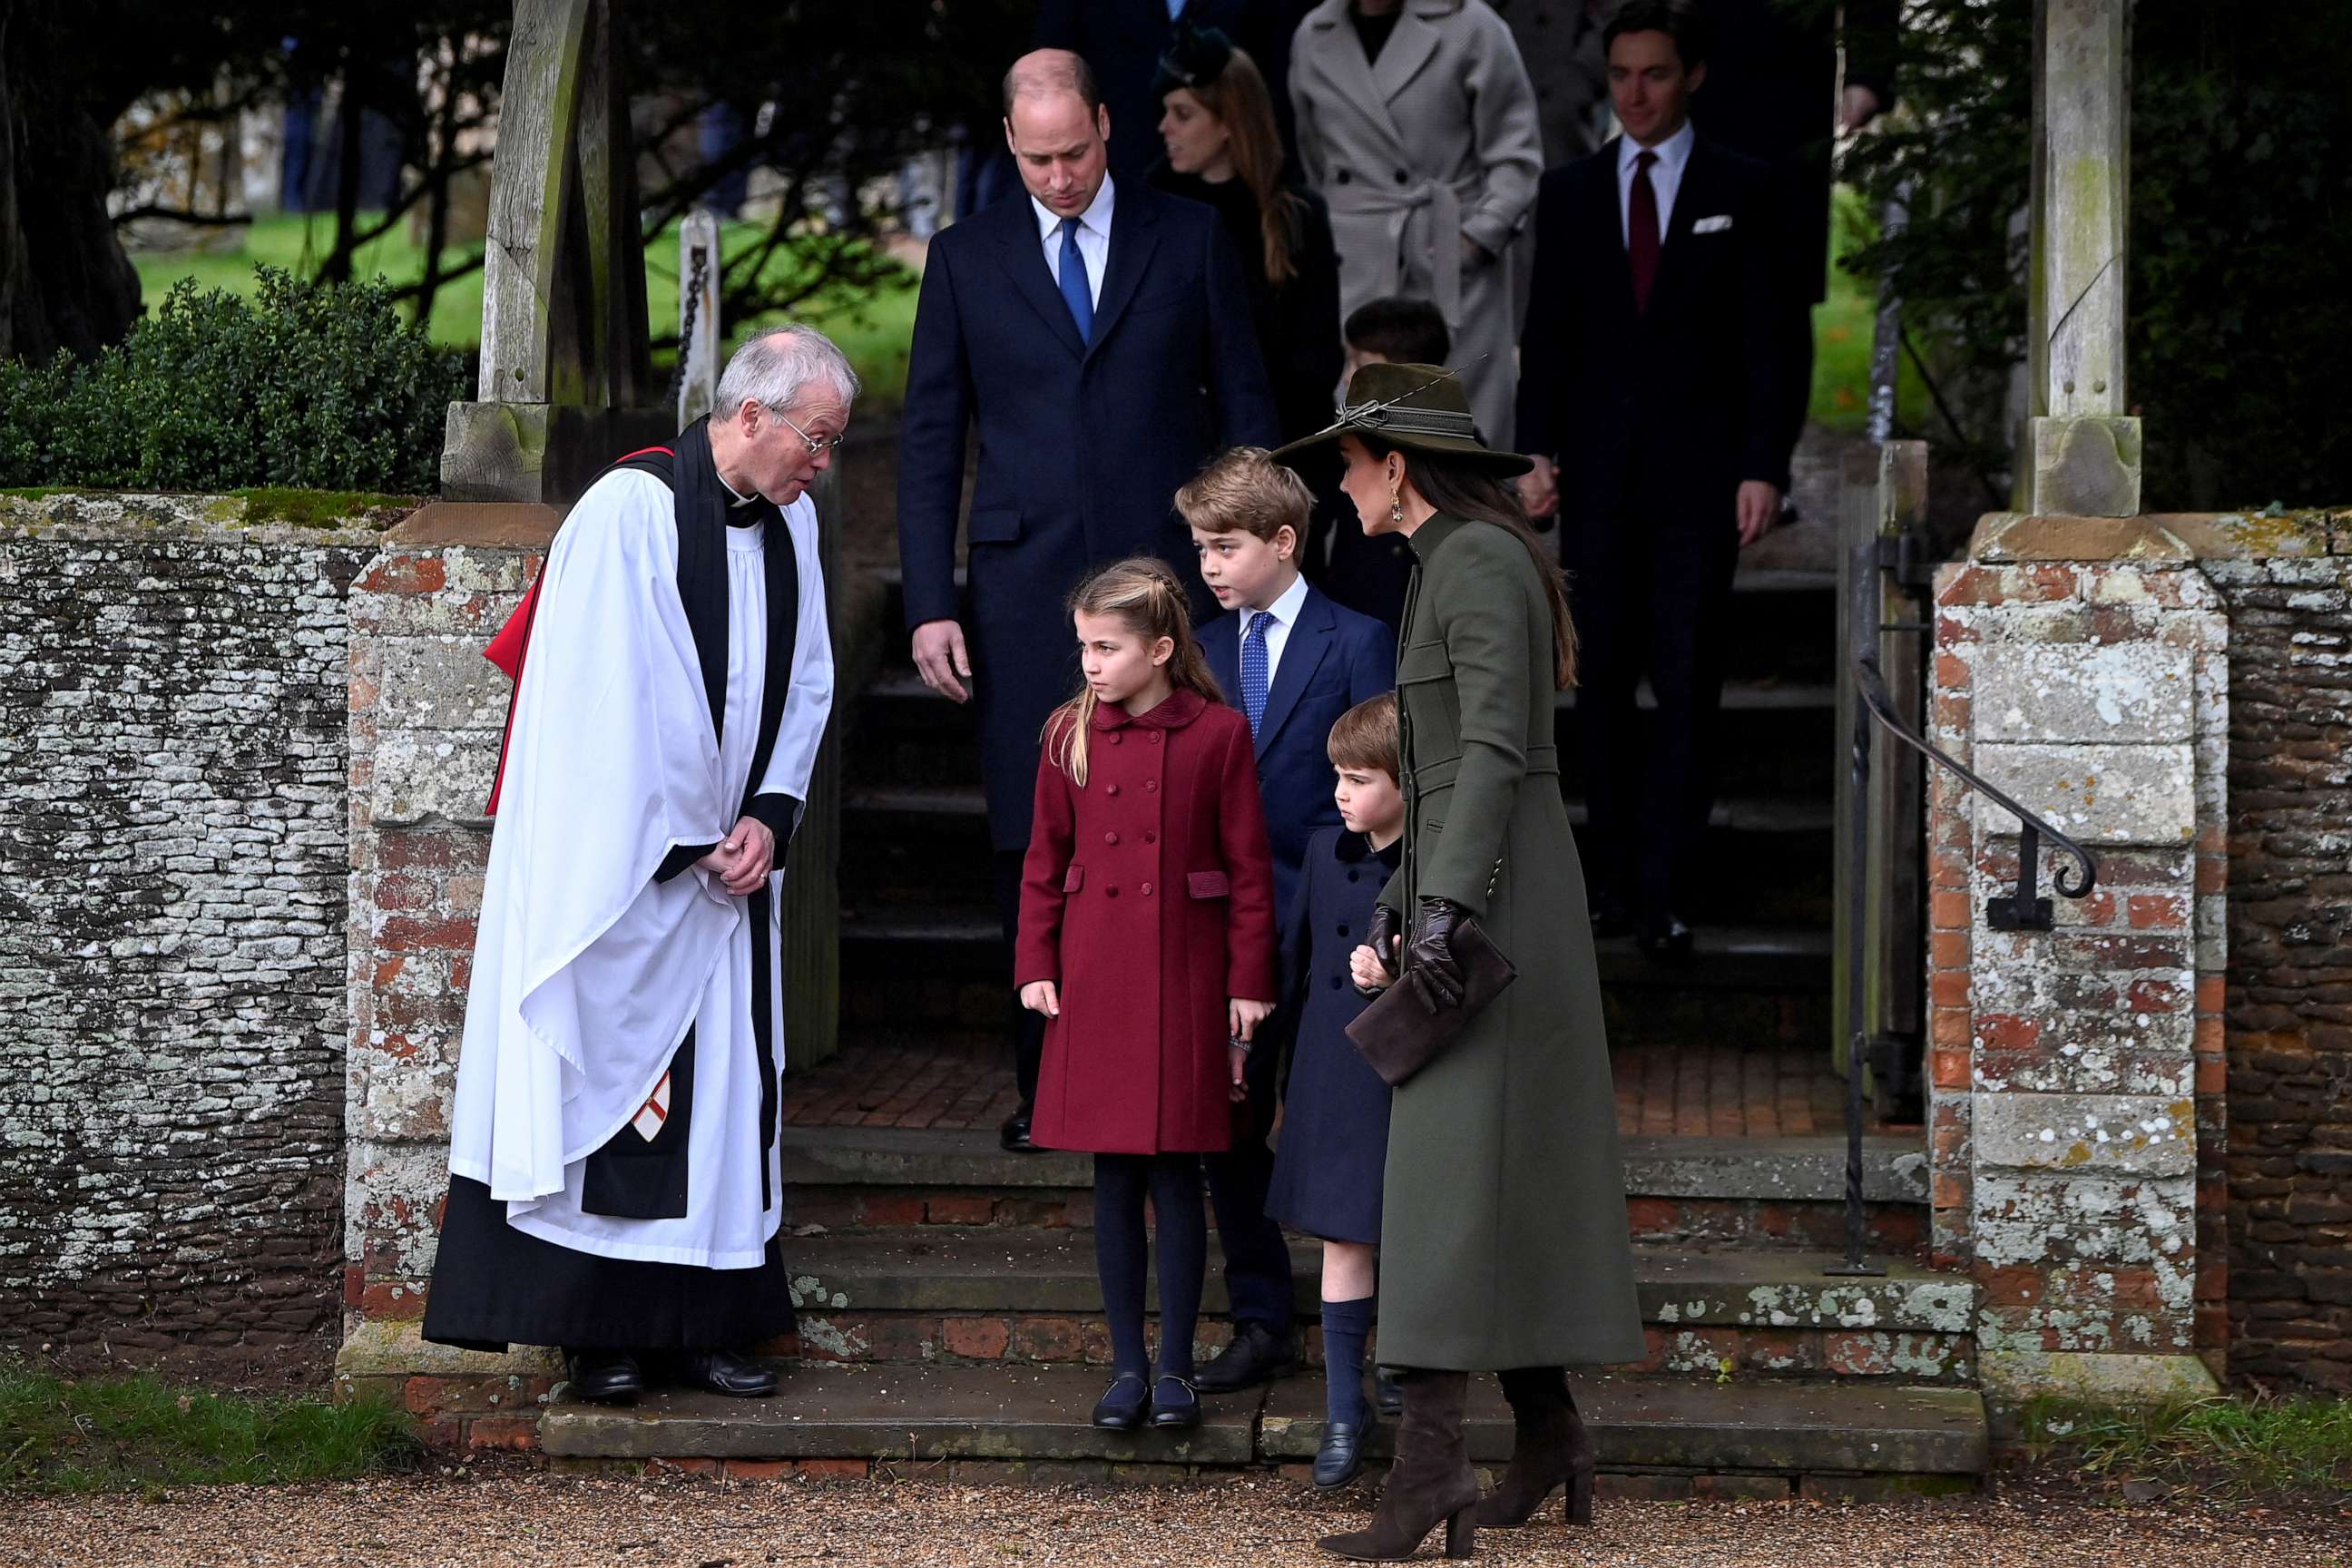 PHOTO: Prince William and Catherine, Princess of Wales, along with their children, leave the Royal Family's traditional Christmas Day service at St Mary Magdalene Church, December 25, 2022.